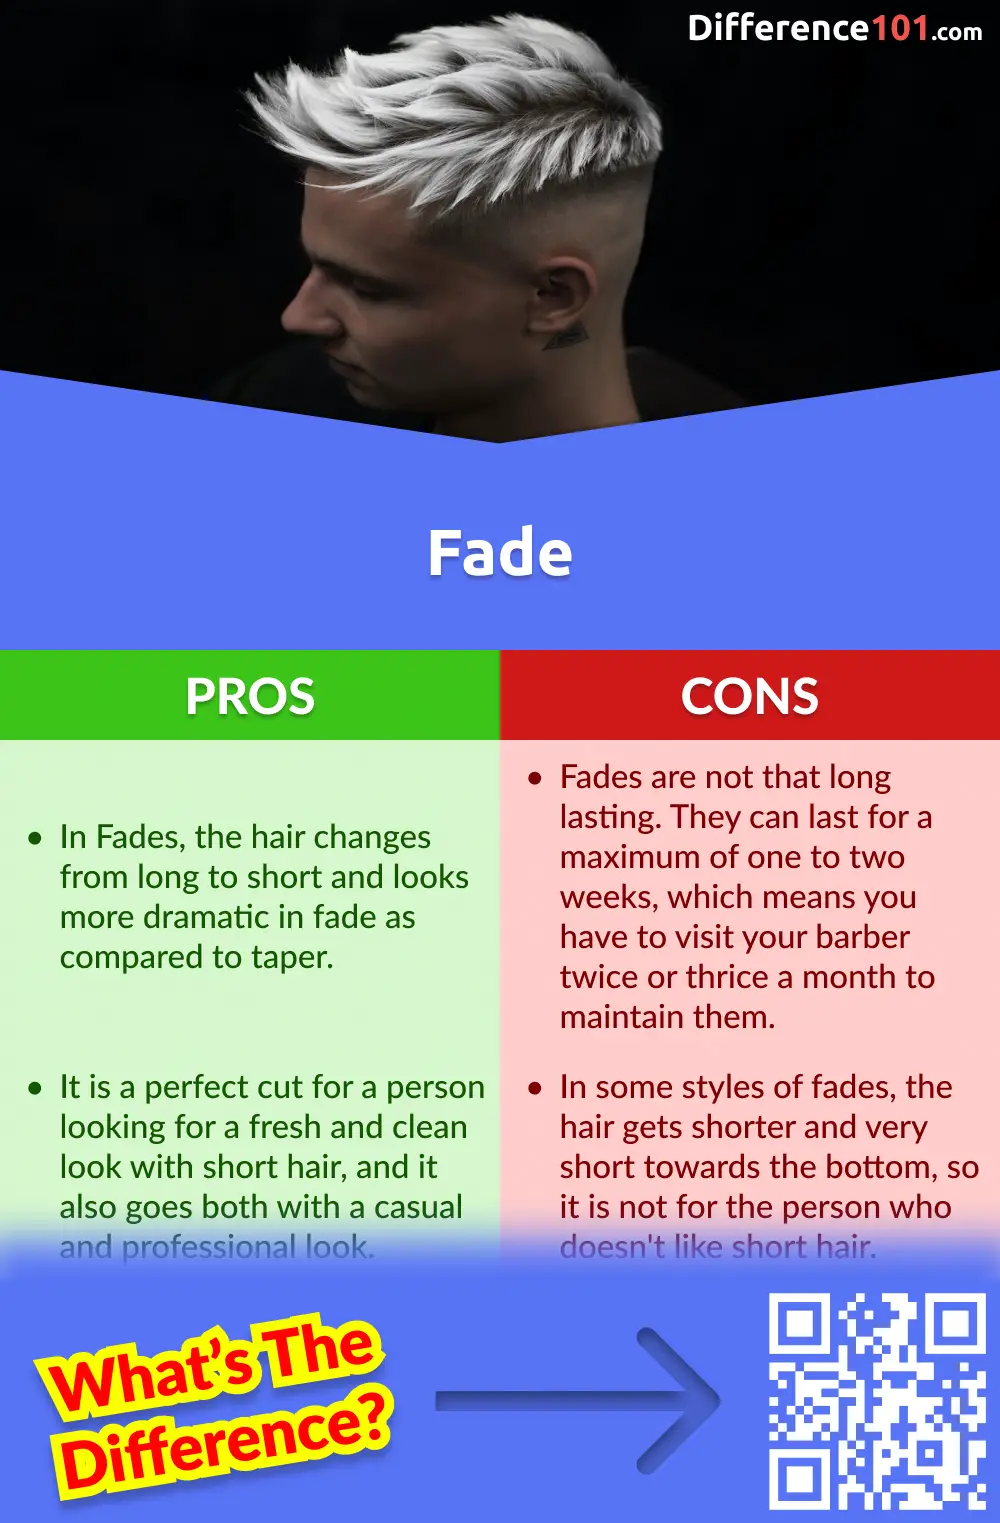 Fade Pros and Cons